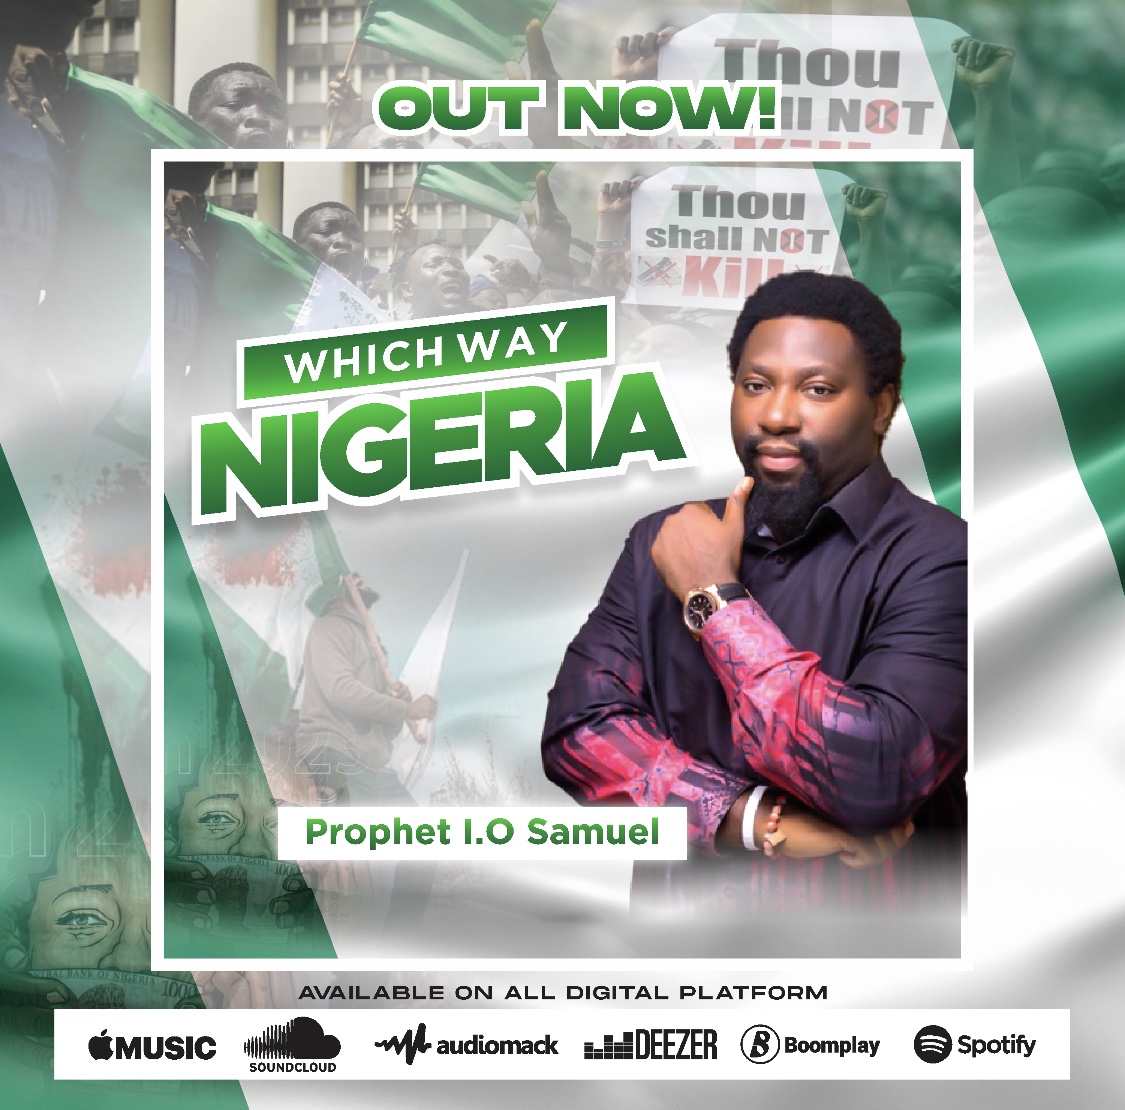 Prophet I.O Samuel seeks for peace & justice in new single titled “Which Way Nigeria”